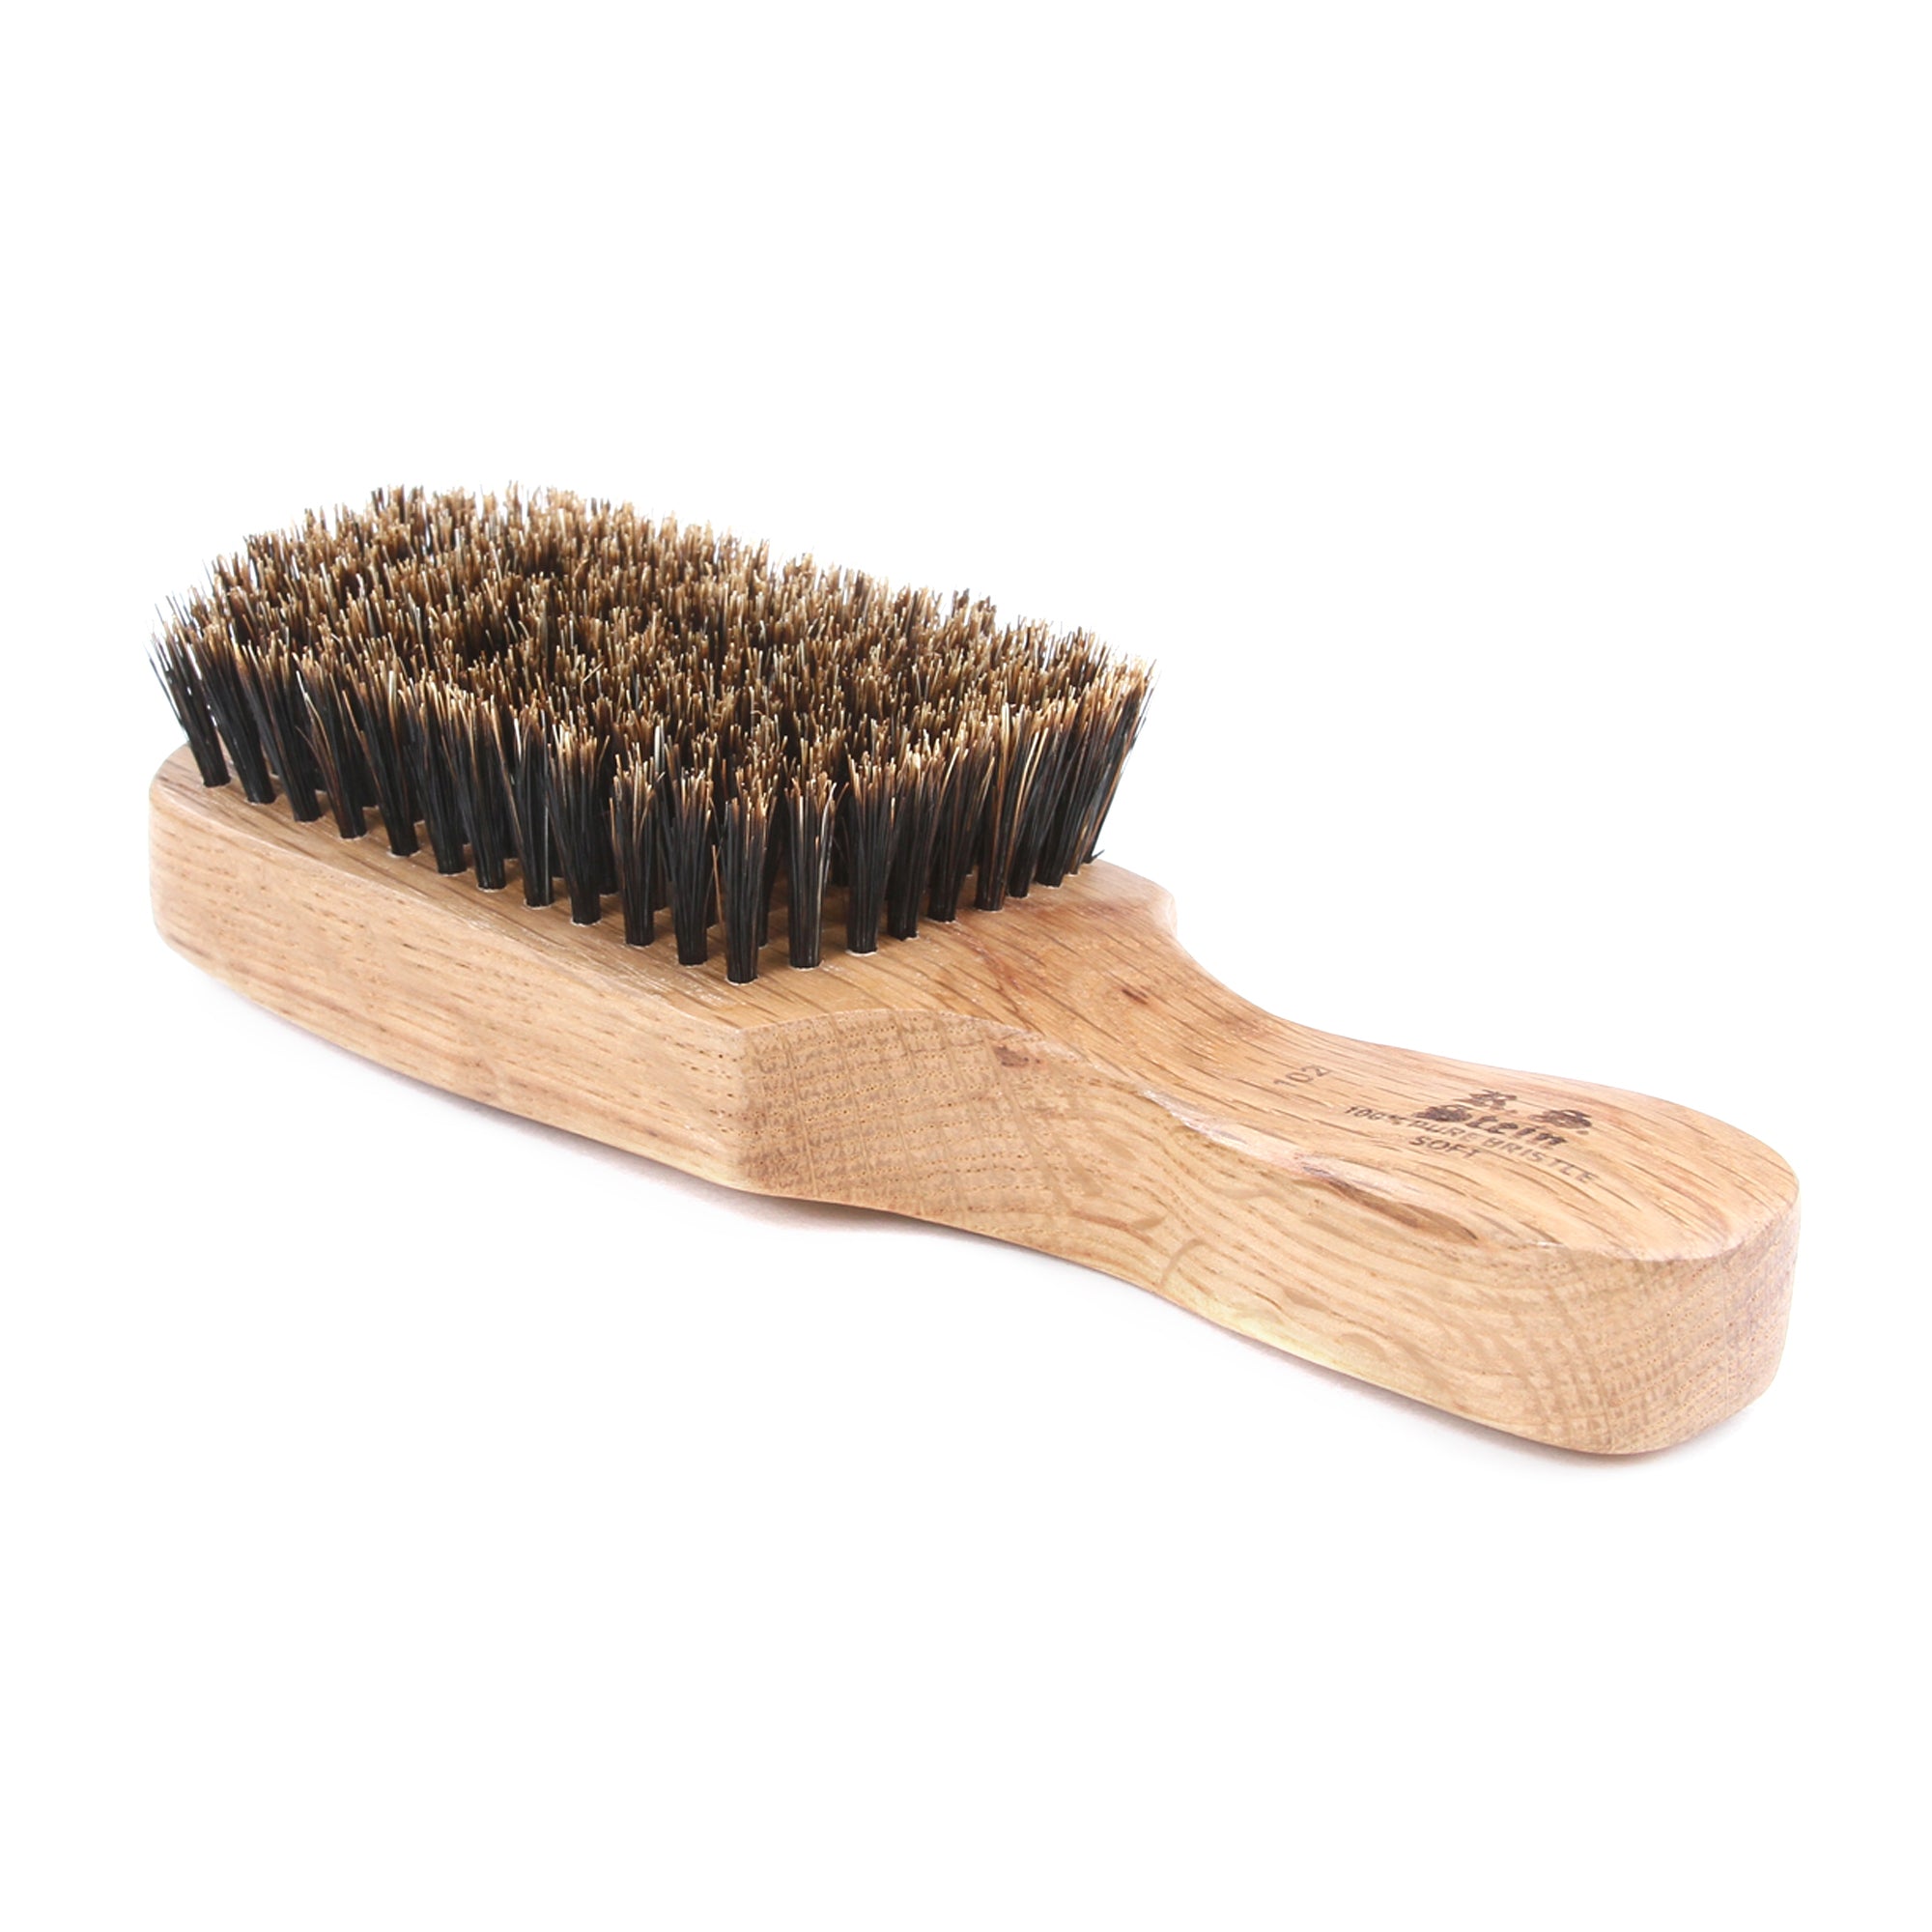 Natural Hair Brush Sale - www.puzzlewood.net 1696384736